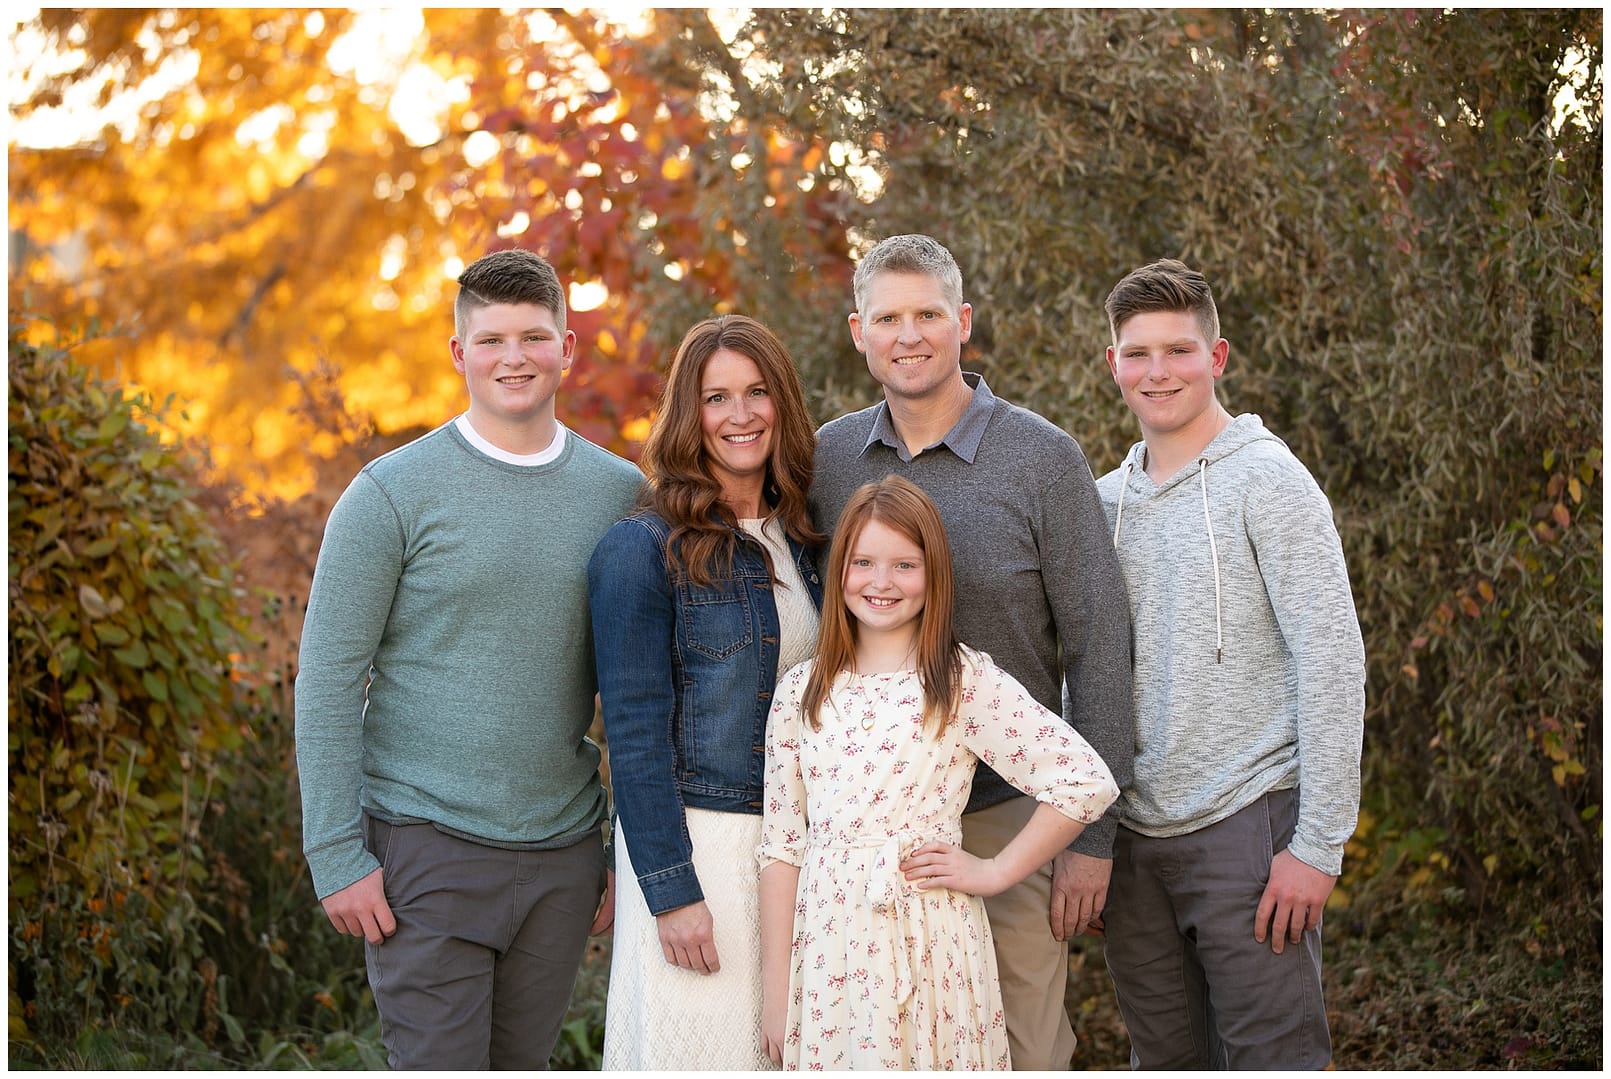 Meridian family of five. Photo by Tiffany Hix Photography.